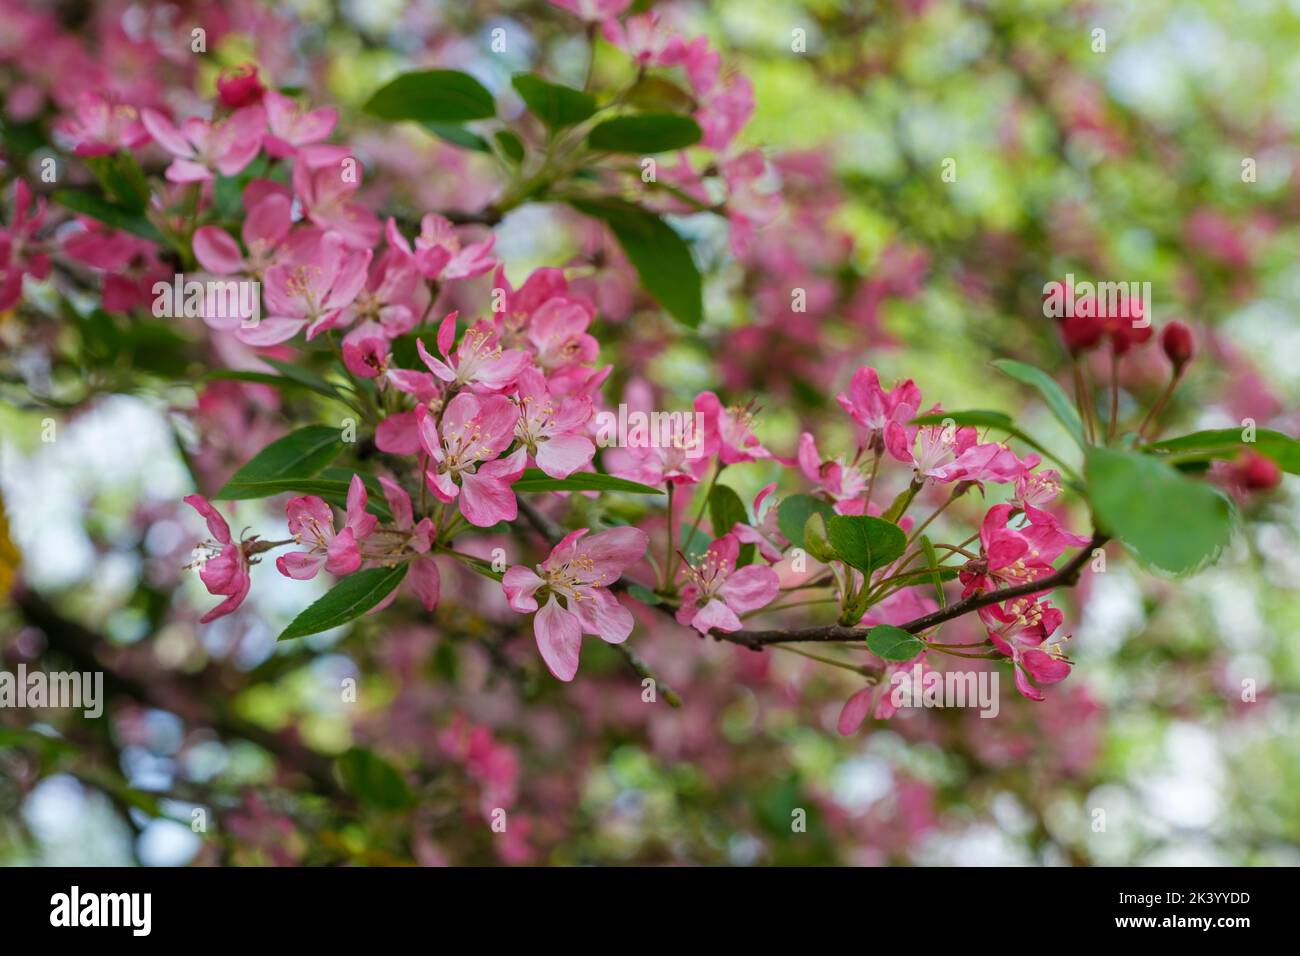 Malus x atrosanguinea, crab apple, flowers scarlet red buds and flowers that turn pink when fully opened. Stock Photo